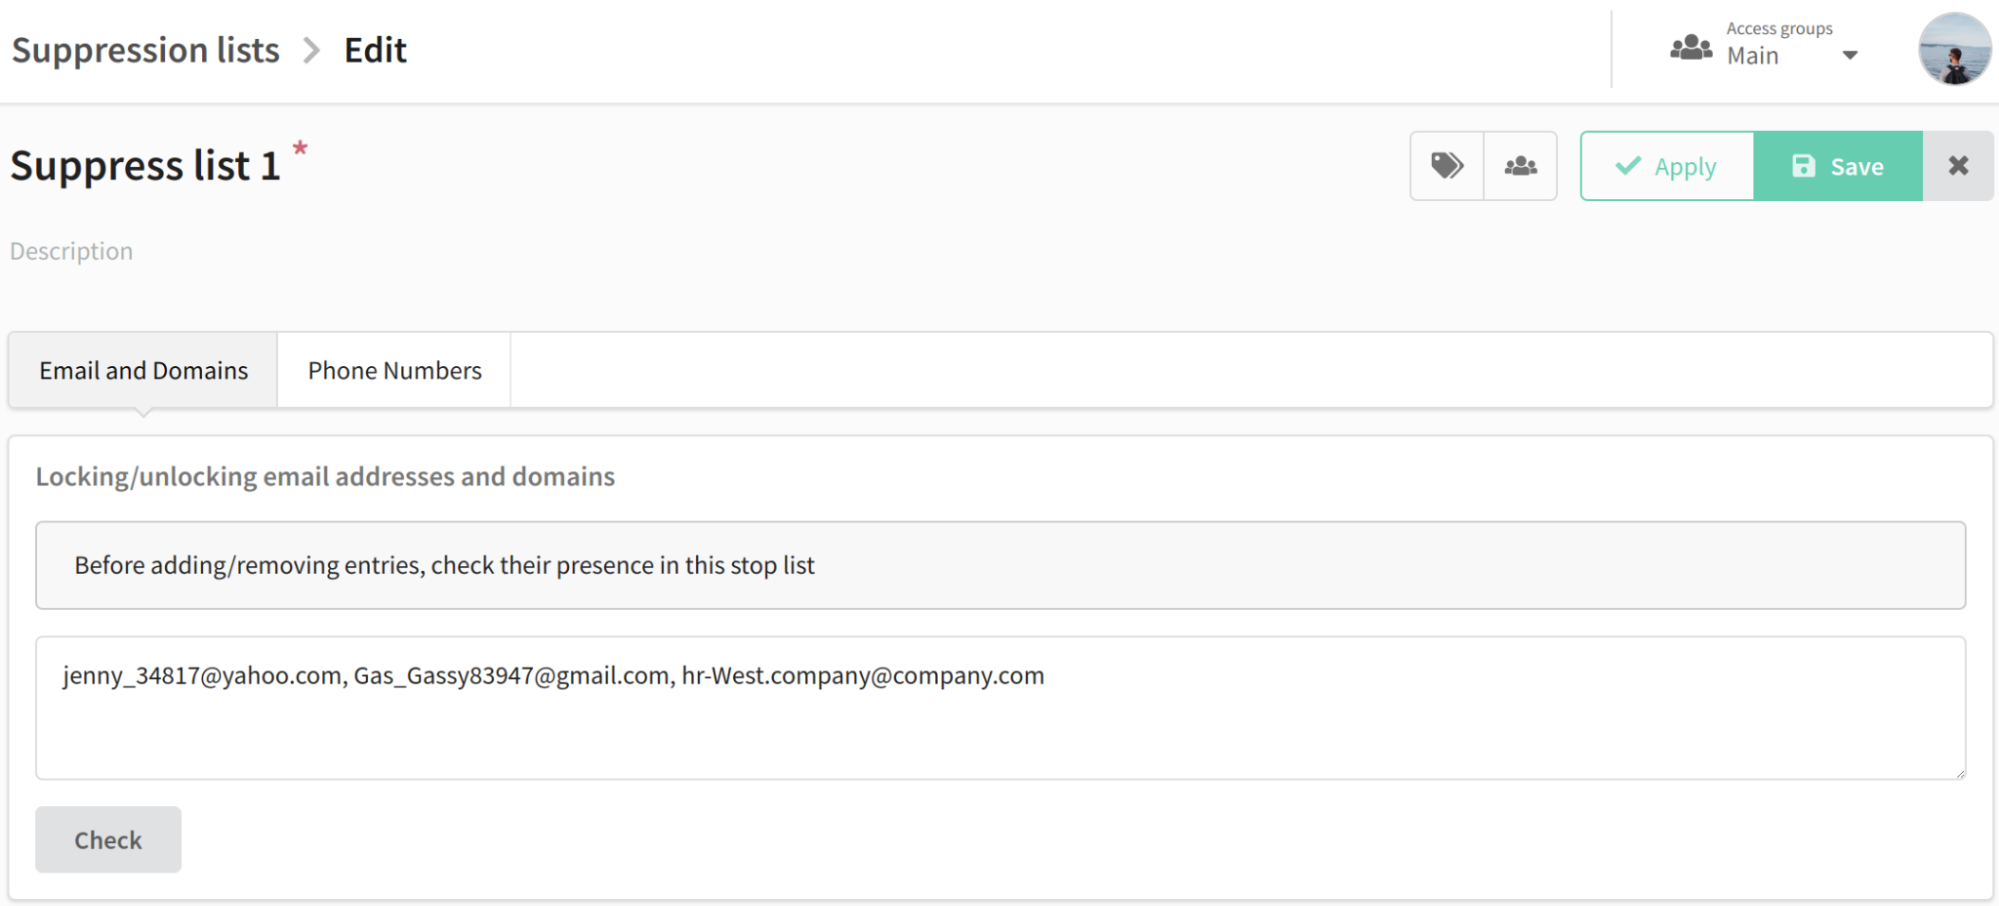 Adding emails and domains to suppression lists